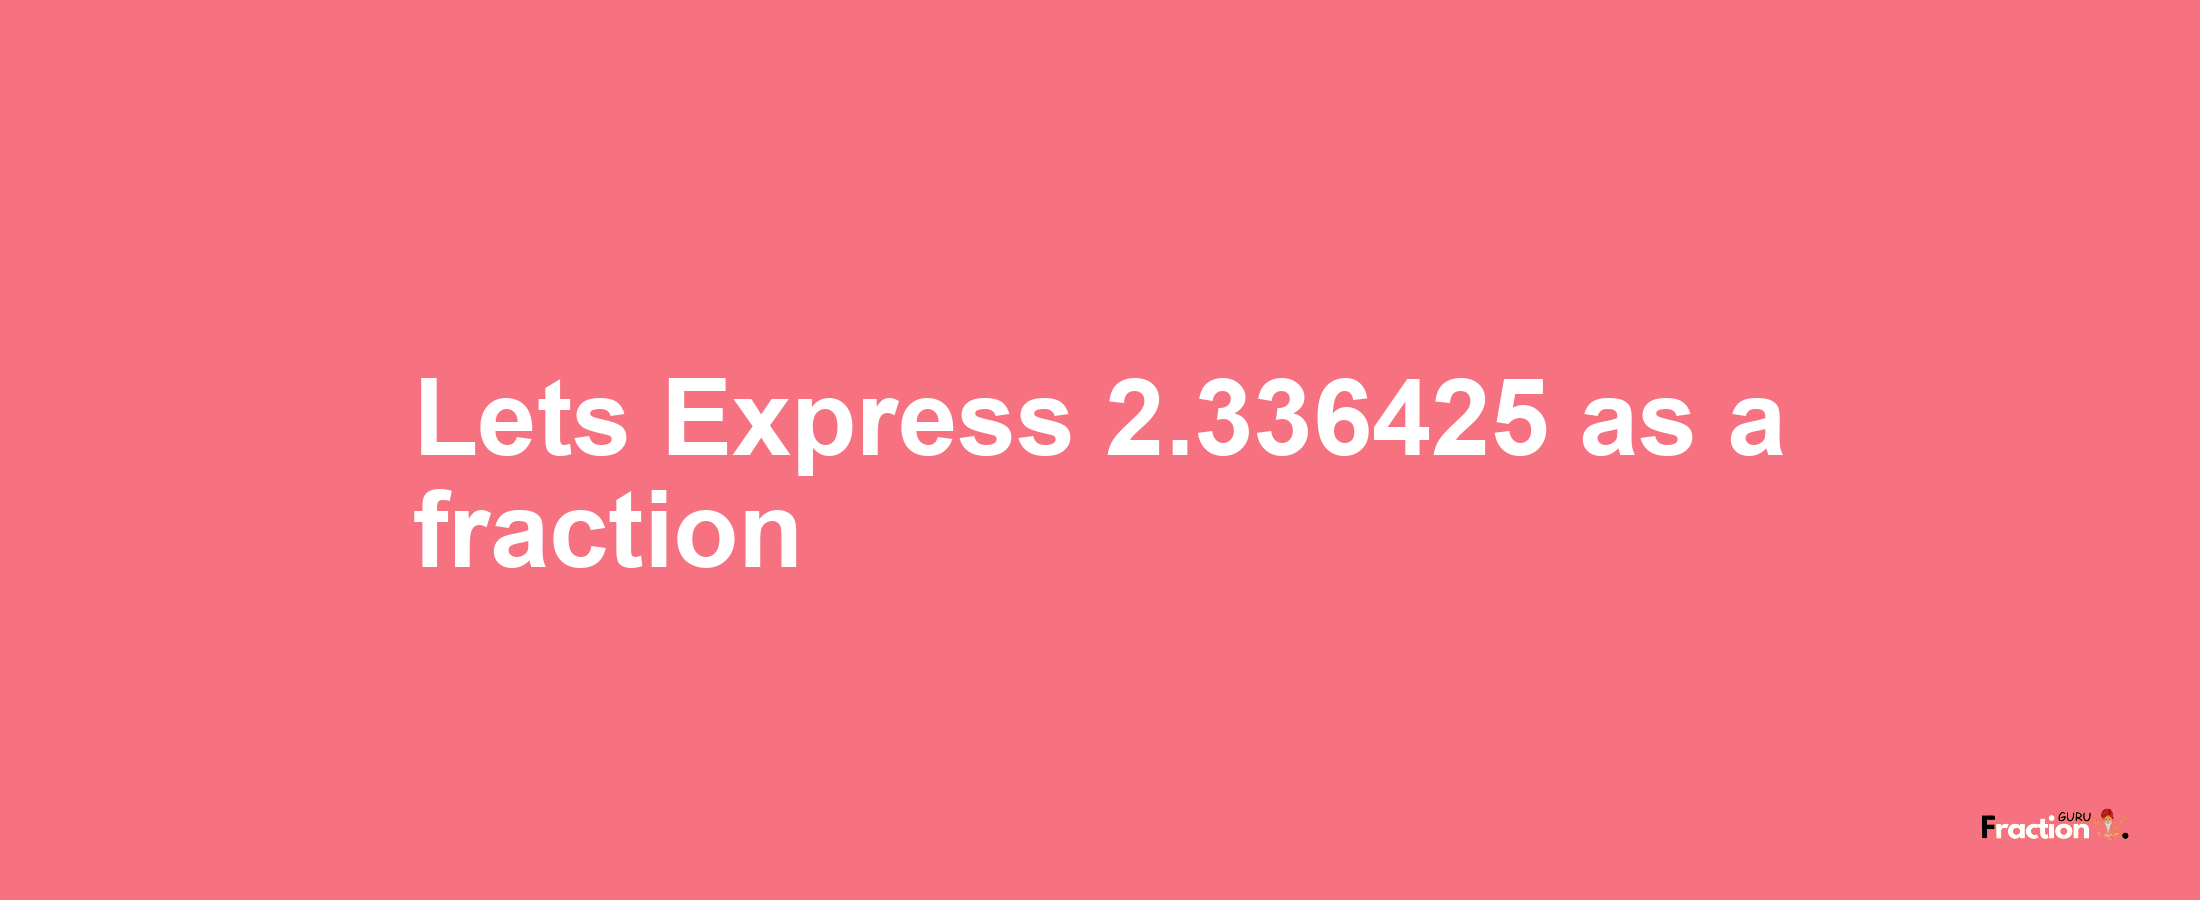 Lets Express 2.336425 as afraction